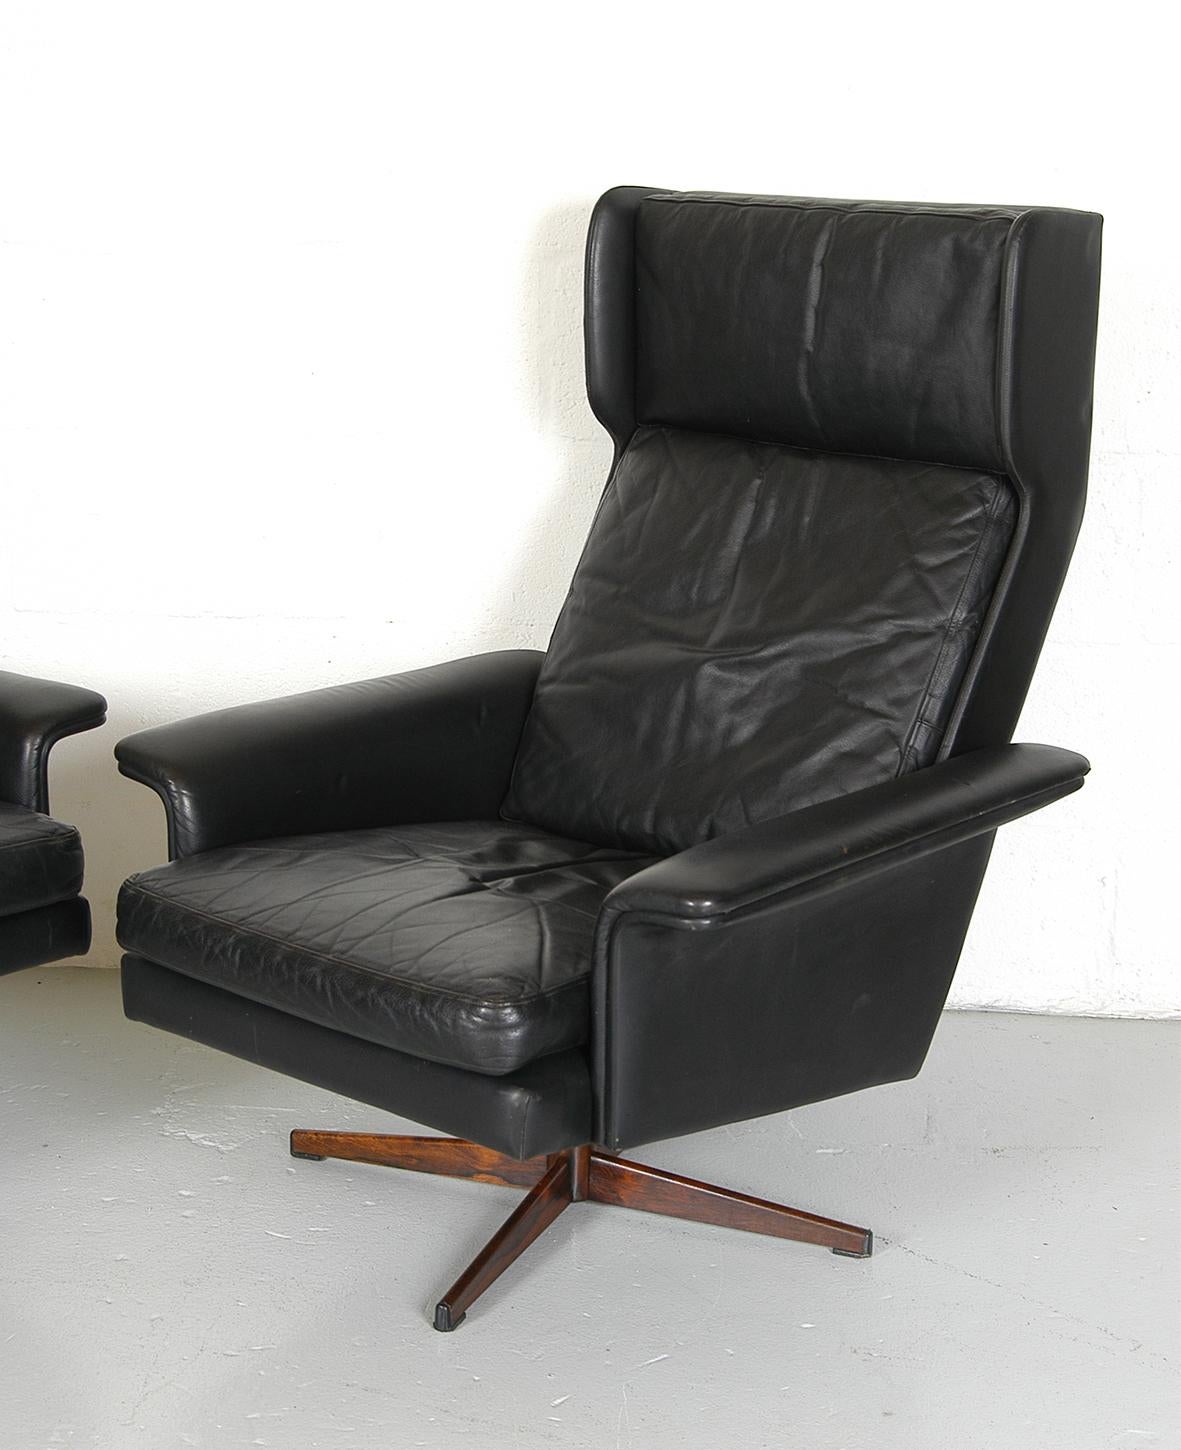 20th Century Pair Midcentury Danish Leather Lounge Chairs by Komfort designed HW Klein 1960s